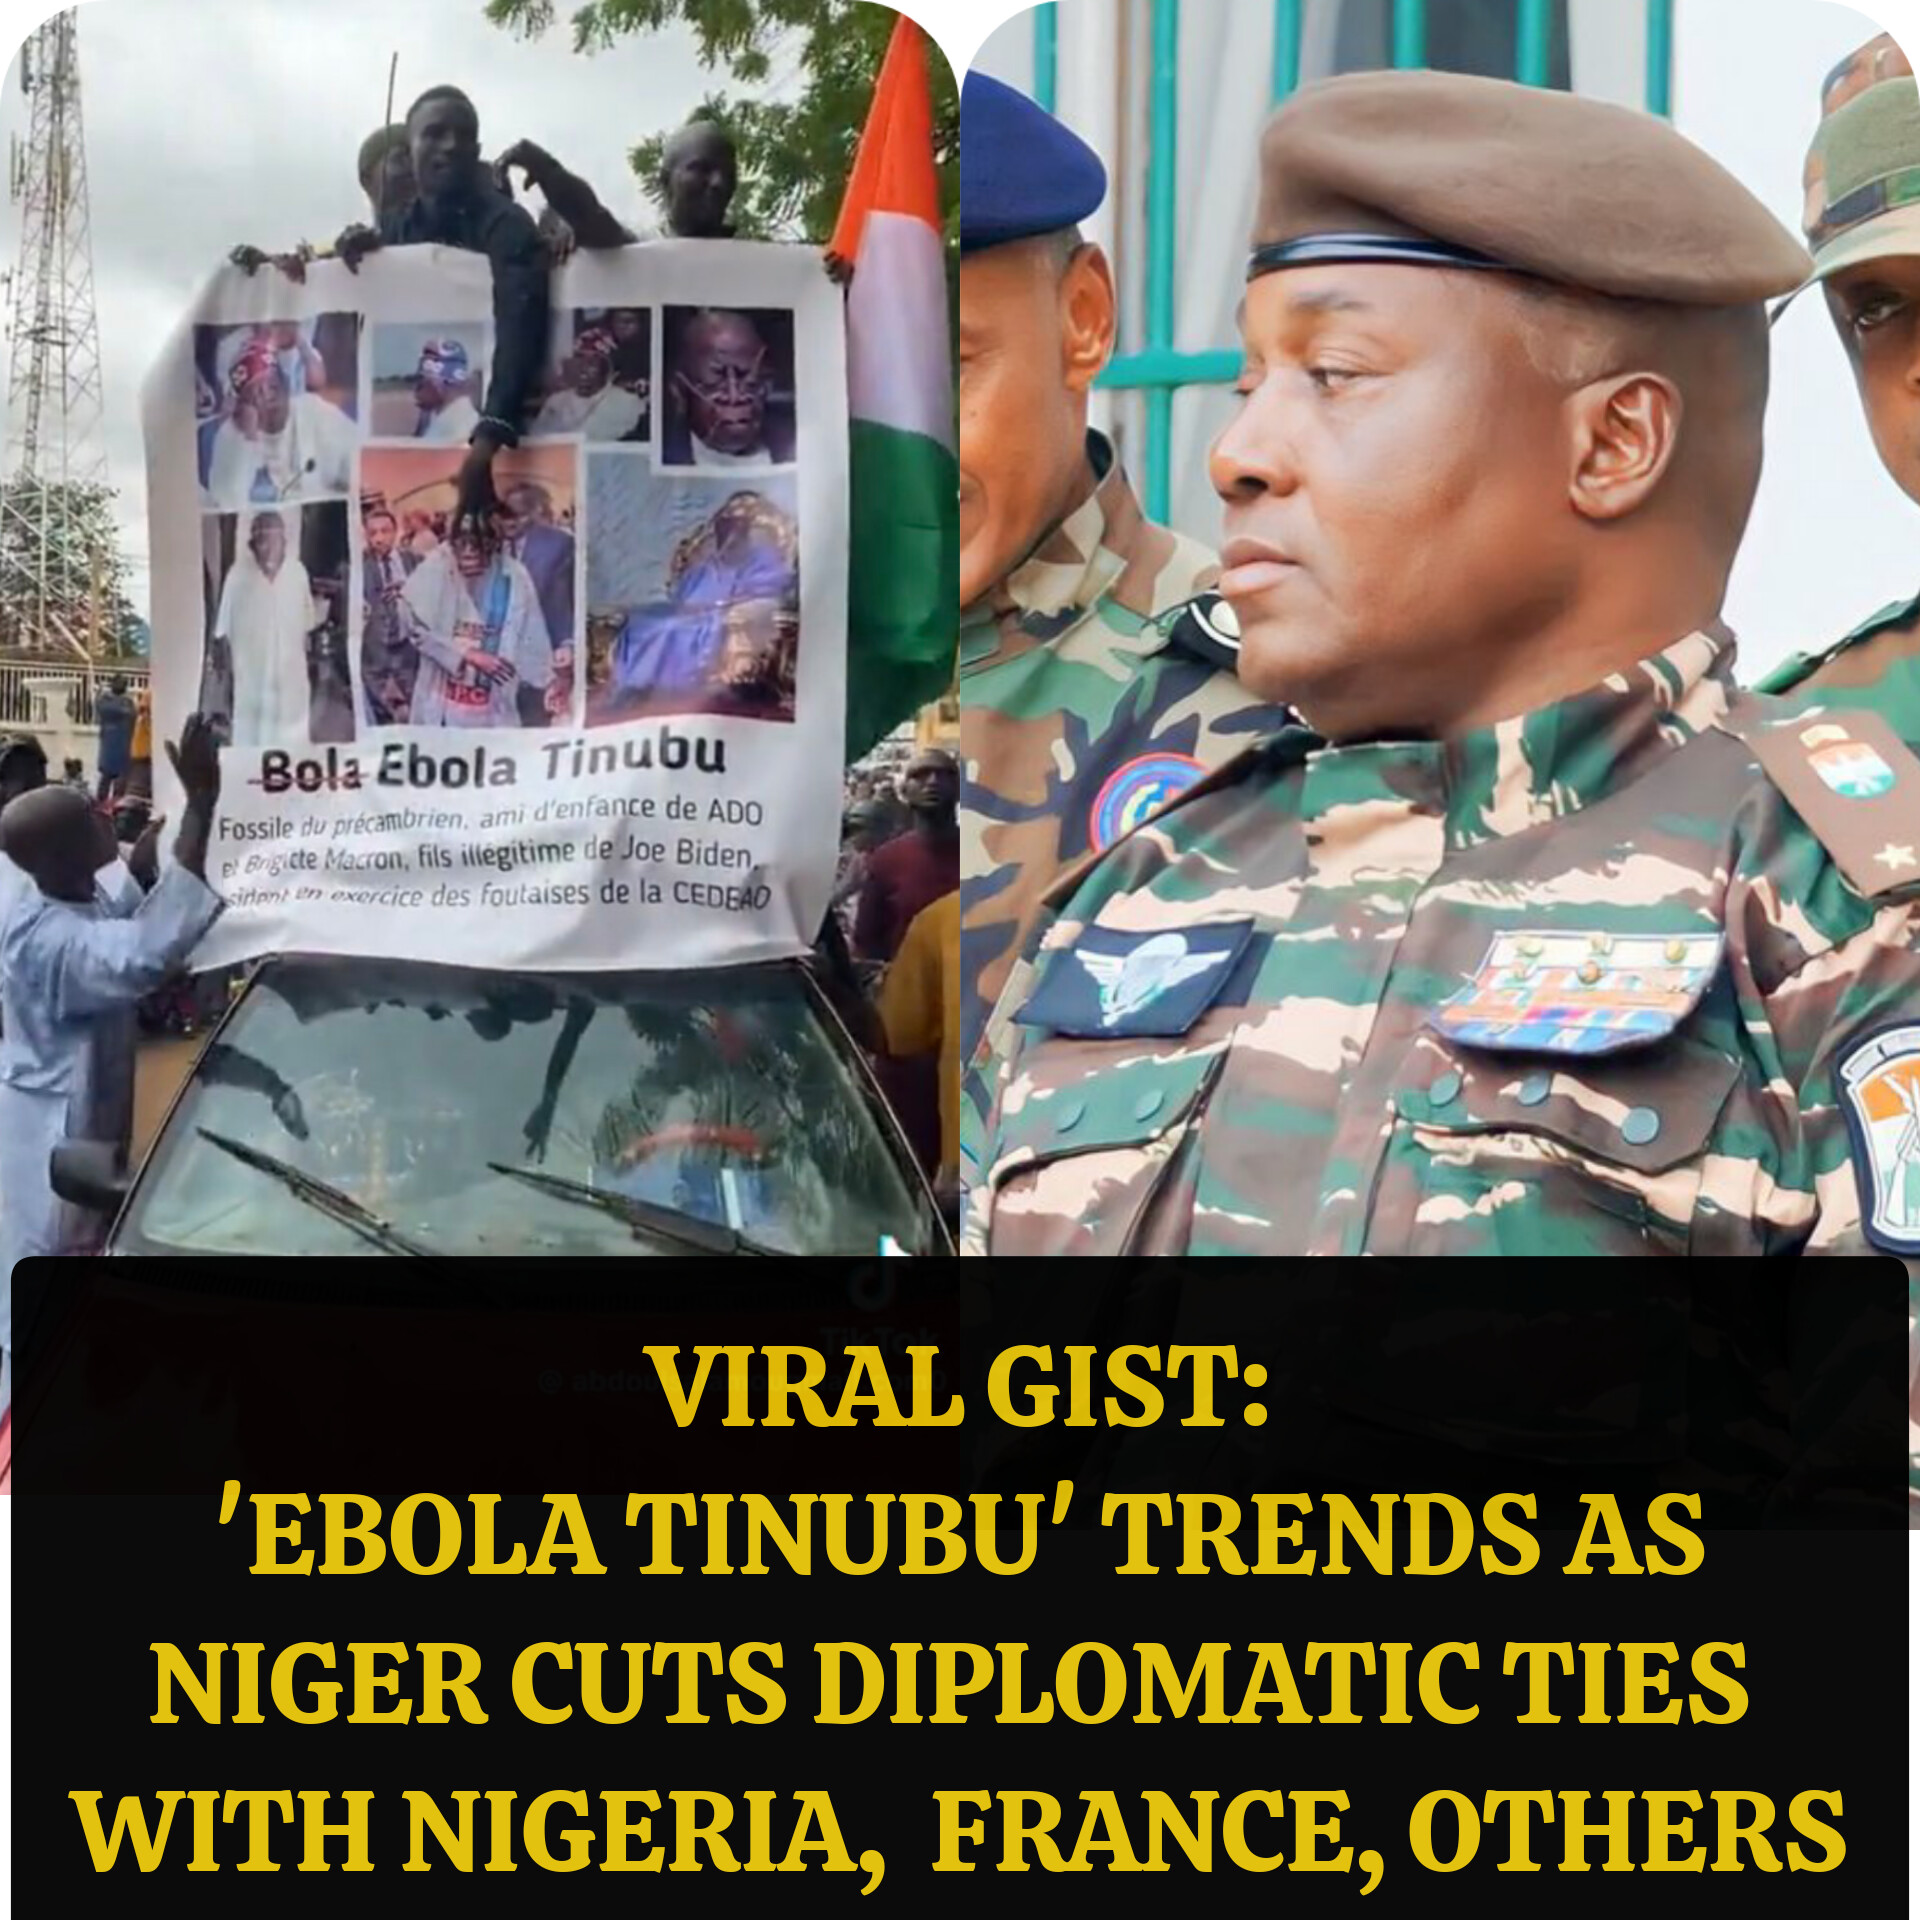 ‘Ebola Tinubu’ Trends As Niger Cuts Diplomatic Ties With Nigeria, France, Others (PHOTOS, VIDEOS)